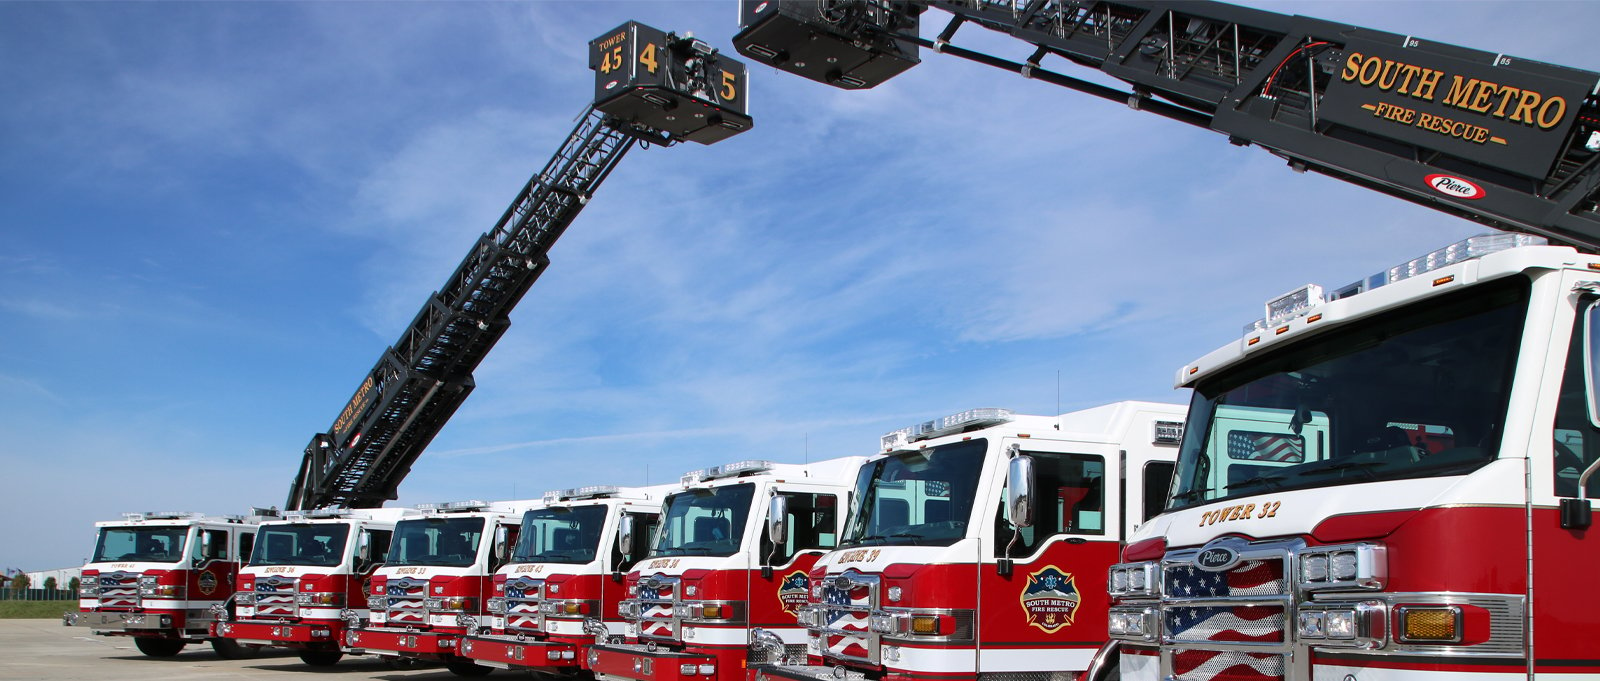 Seven Pierce fire apparatus lined up displaying their aerial ladders on the ends extended over the apparatus in the middle showing a full Pierce standardized fleet.